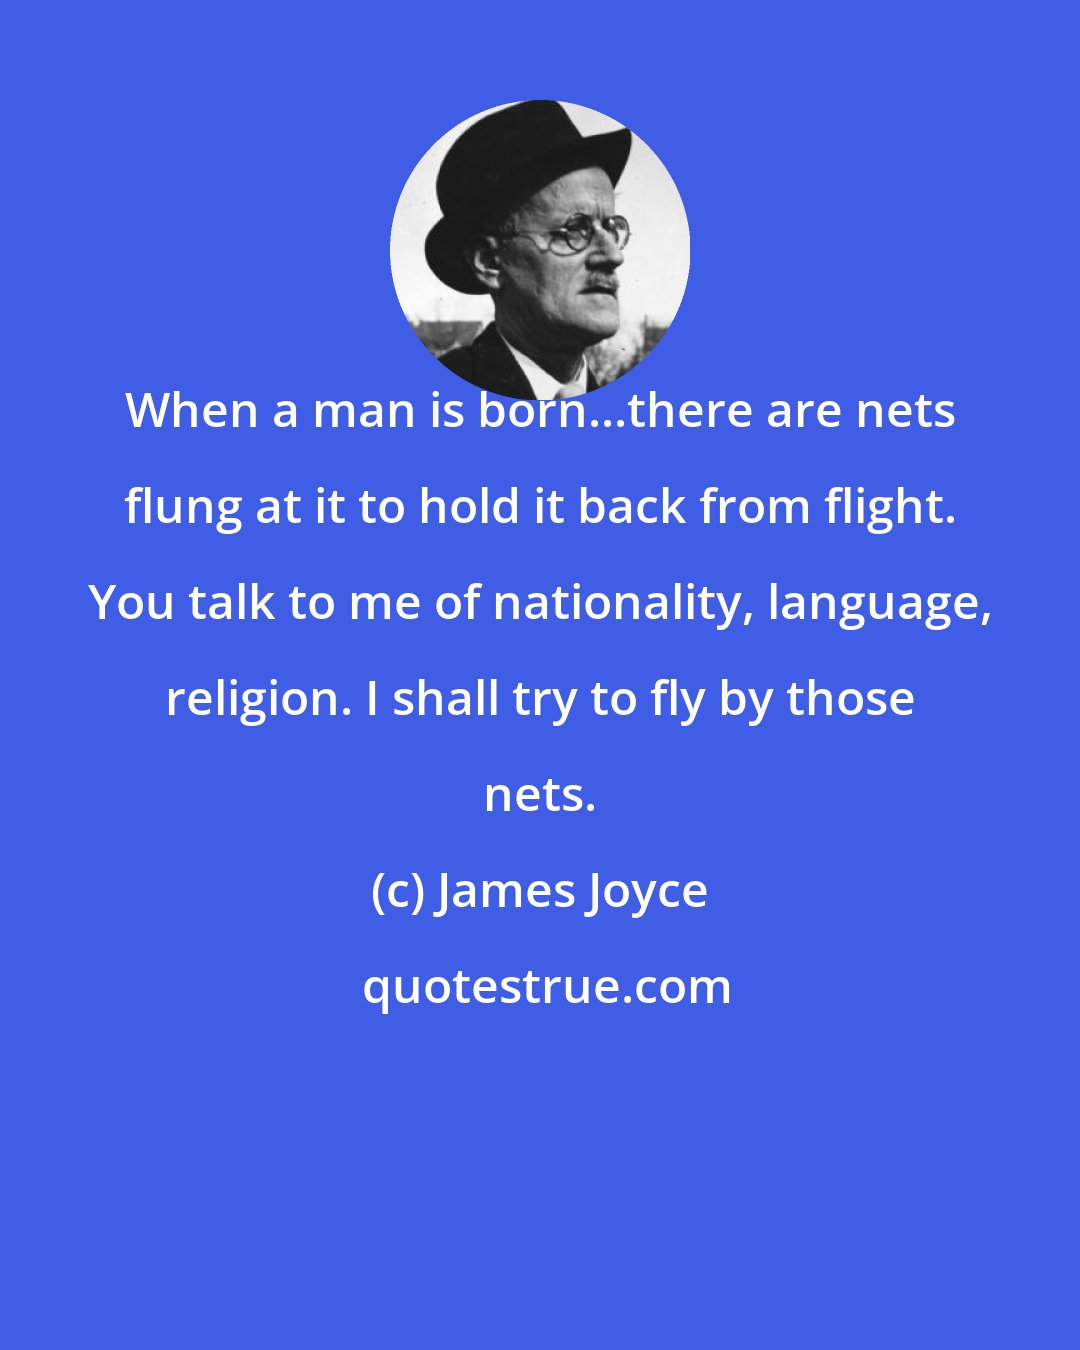 James Joyce: When a man is born...there are nets flung at it to hold it back from flight. You talk to me of nationality, language, religion. I shall try to fly by those nets.